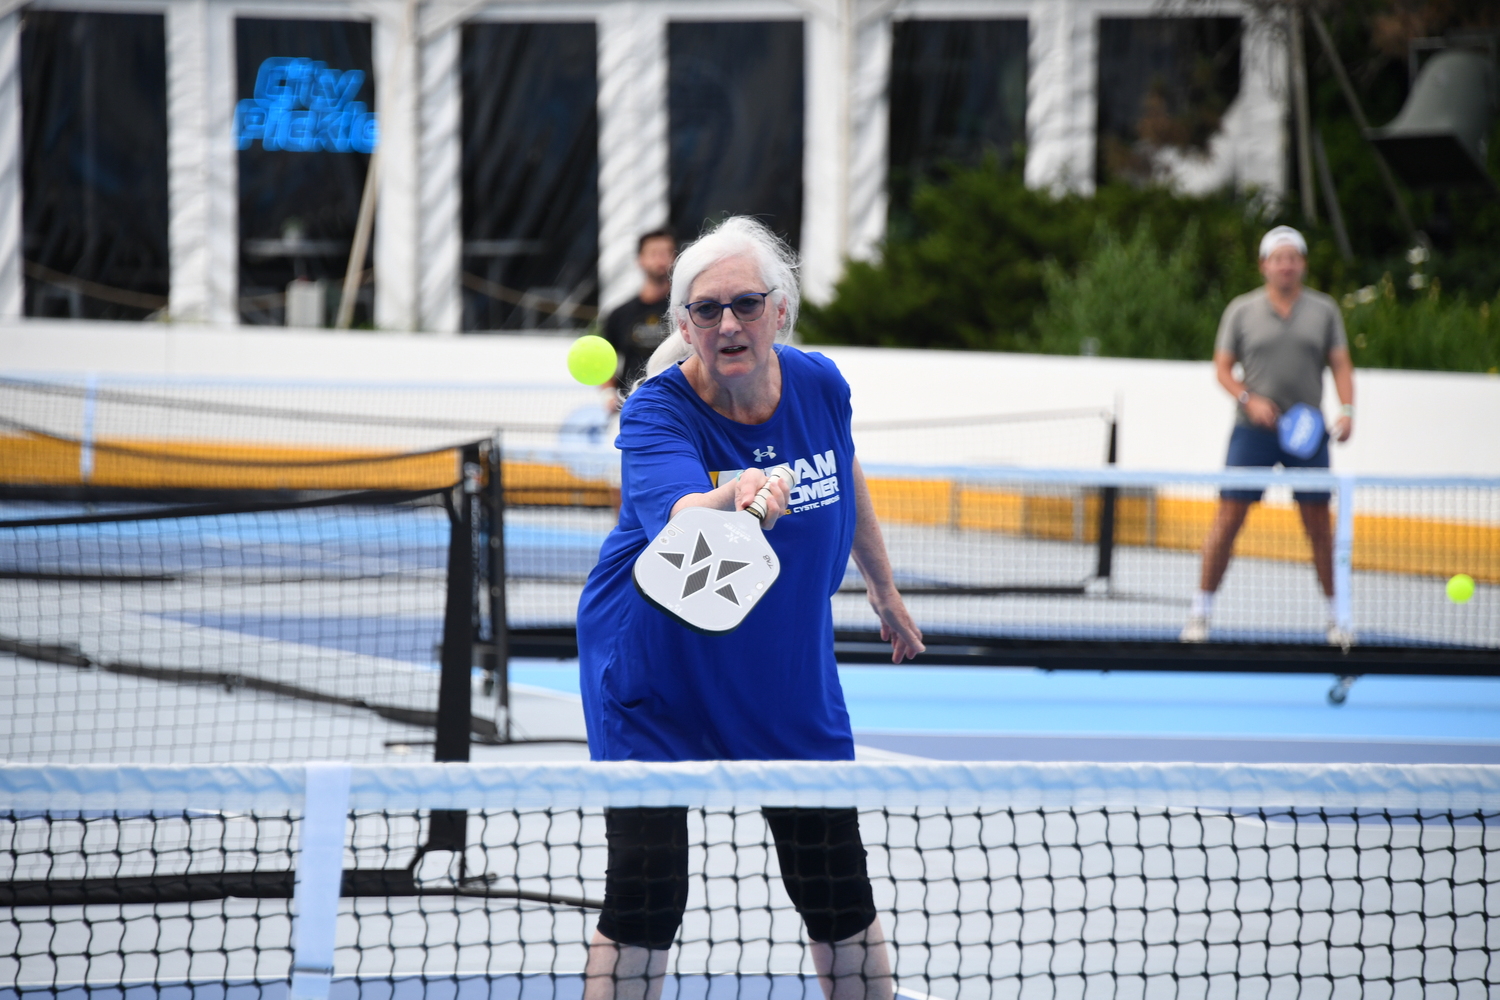 Team Boomer is bringing its pickleball tournament to Southampton Youth Services on July 13.